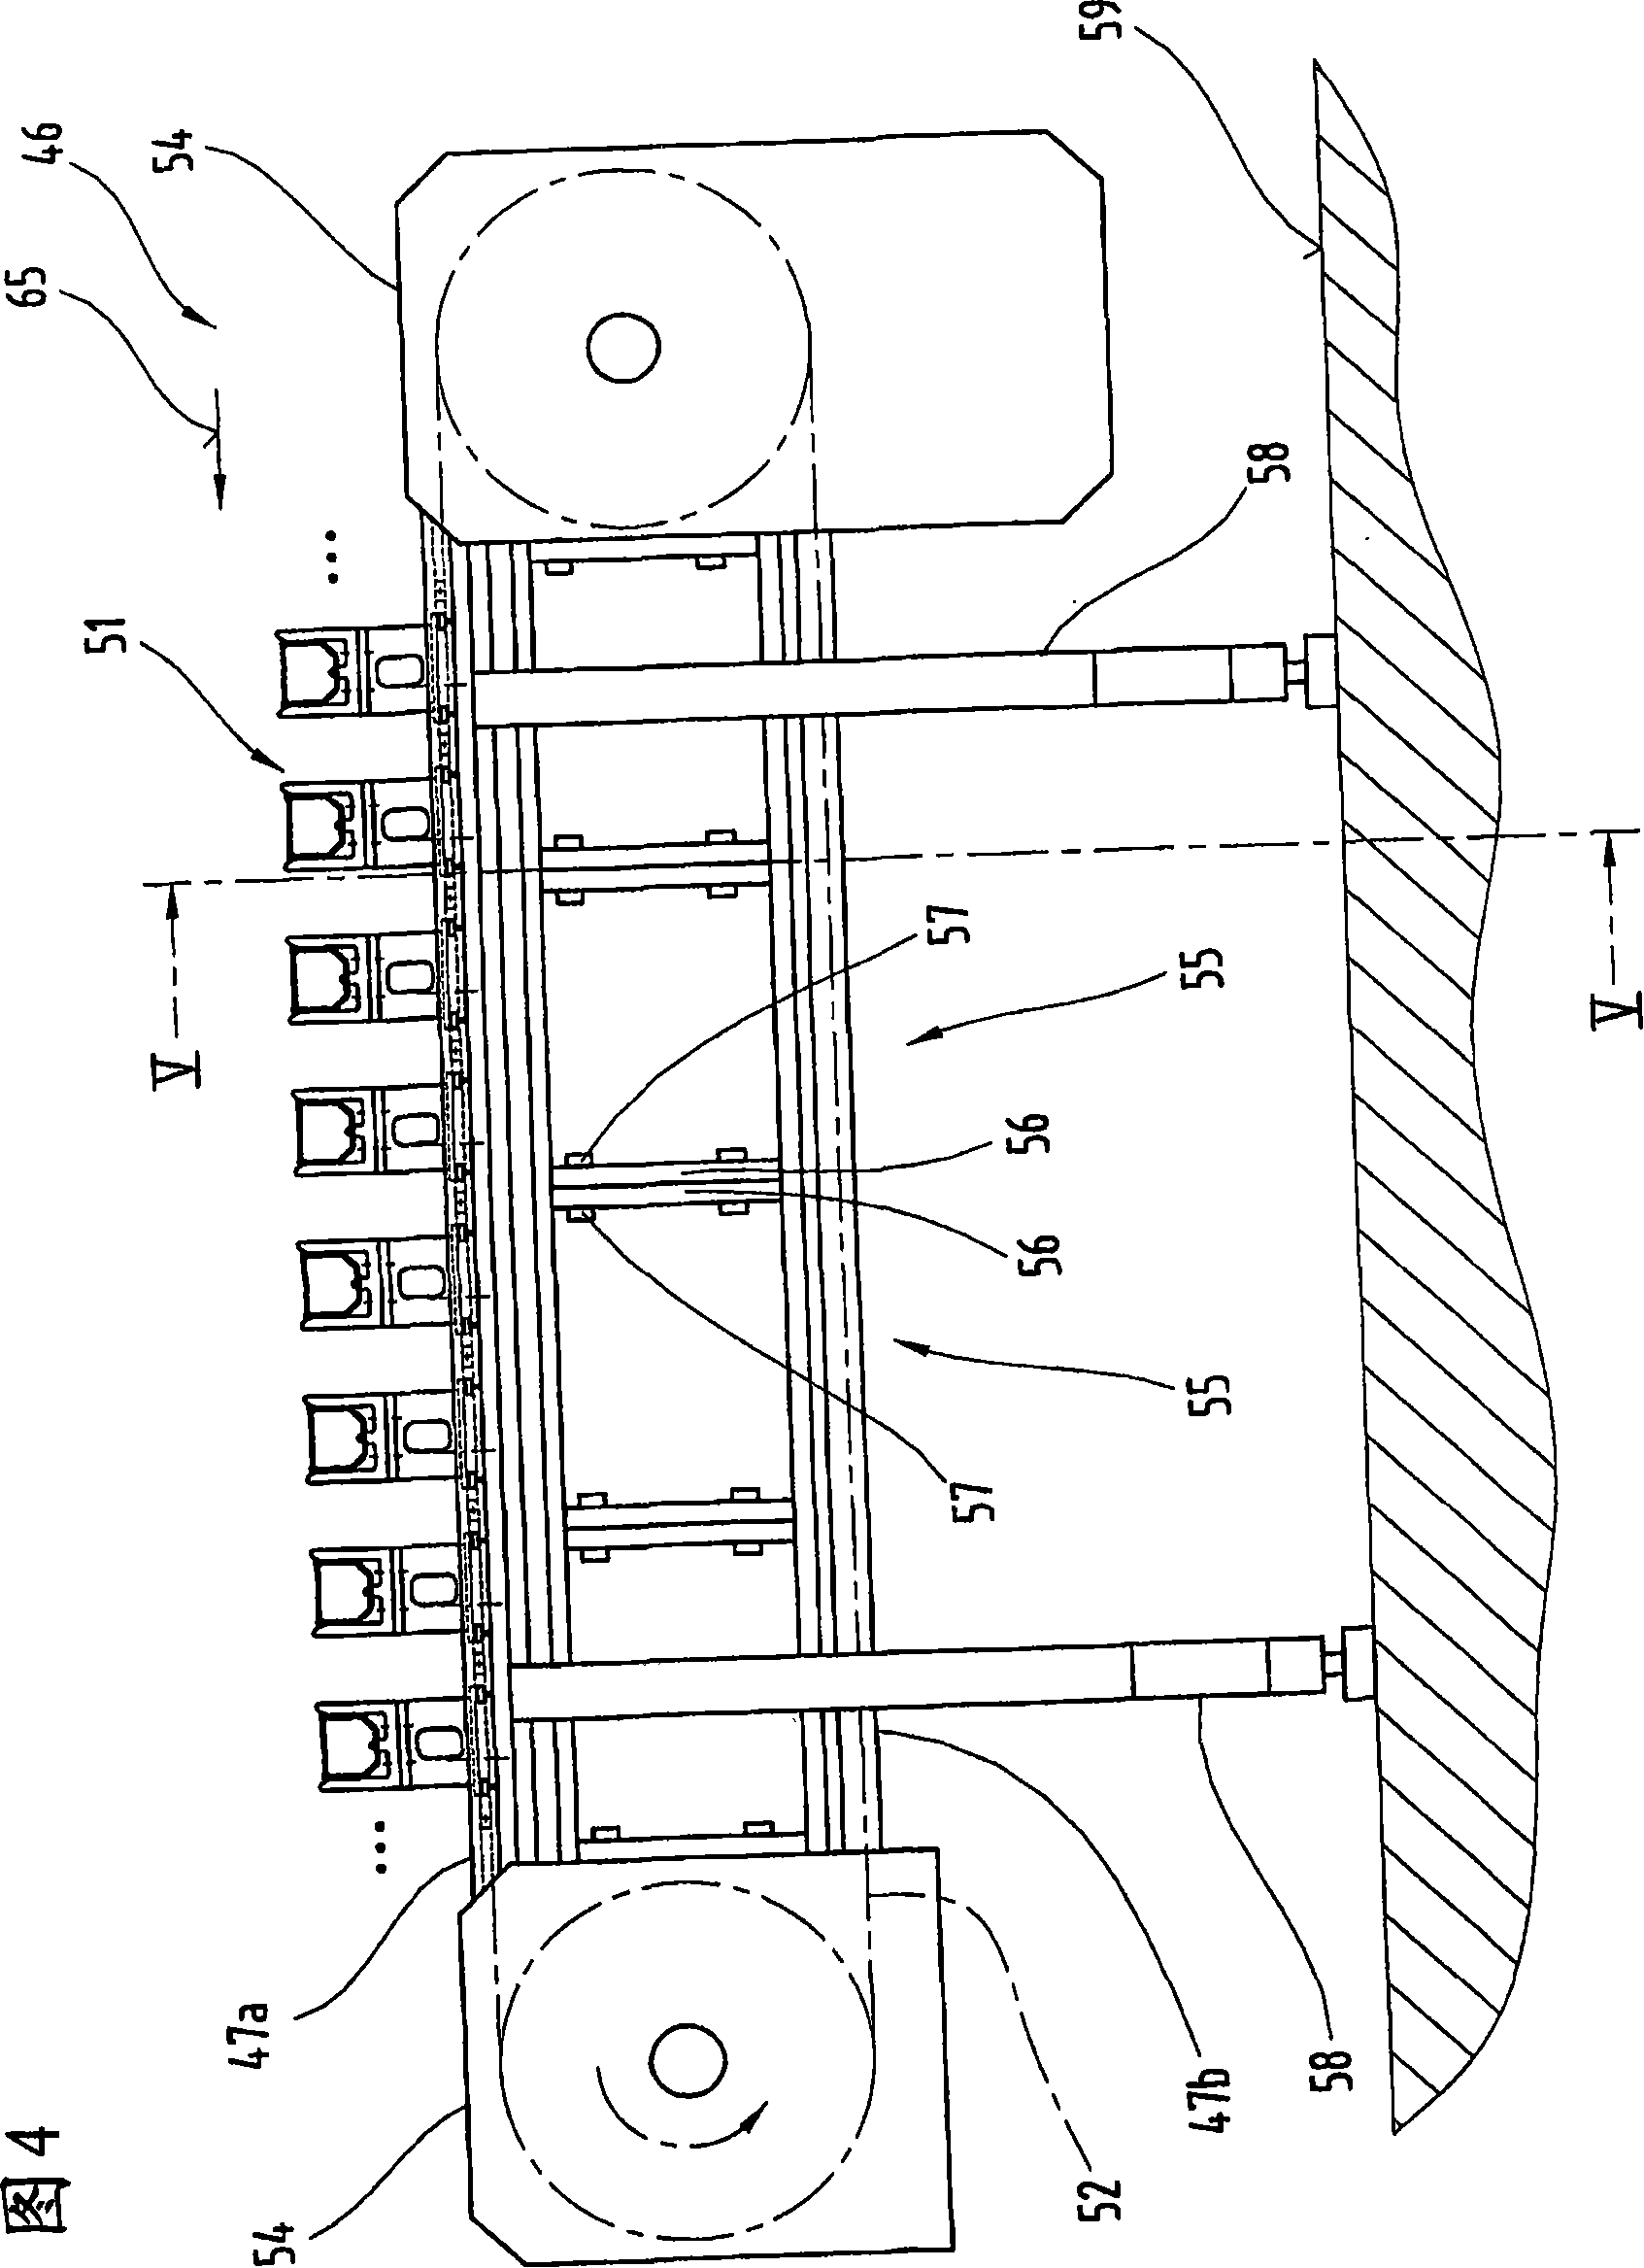 Installation for producing and method for assembling parts